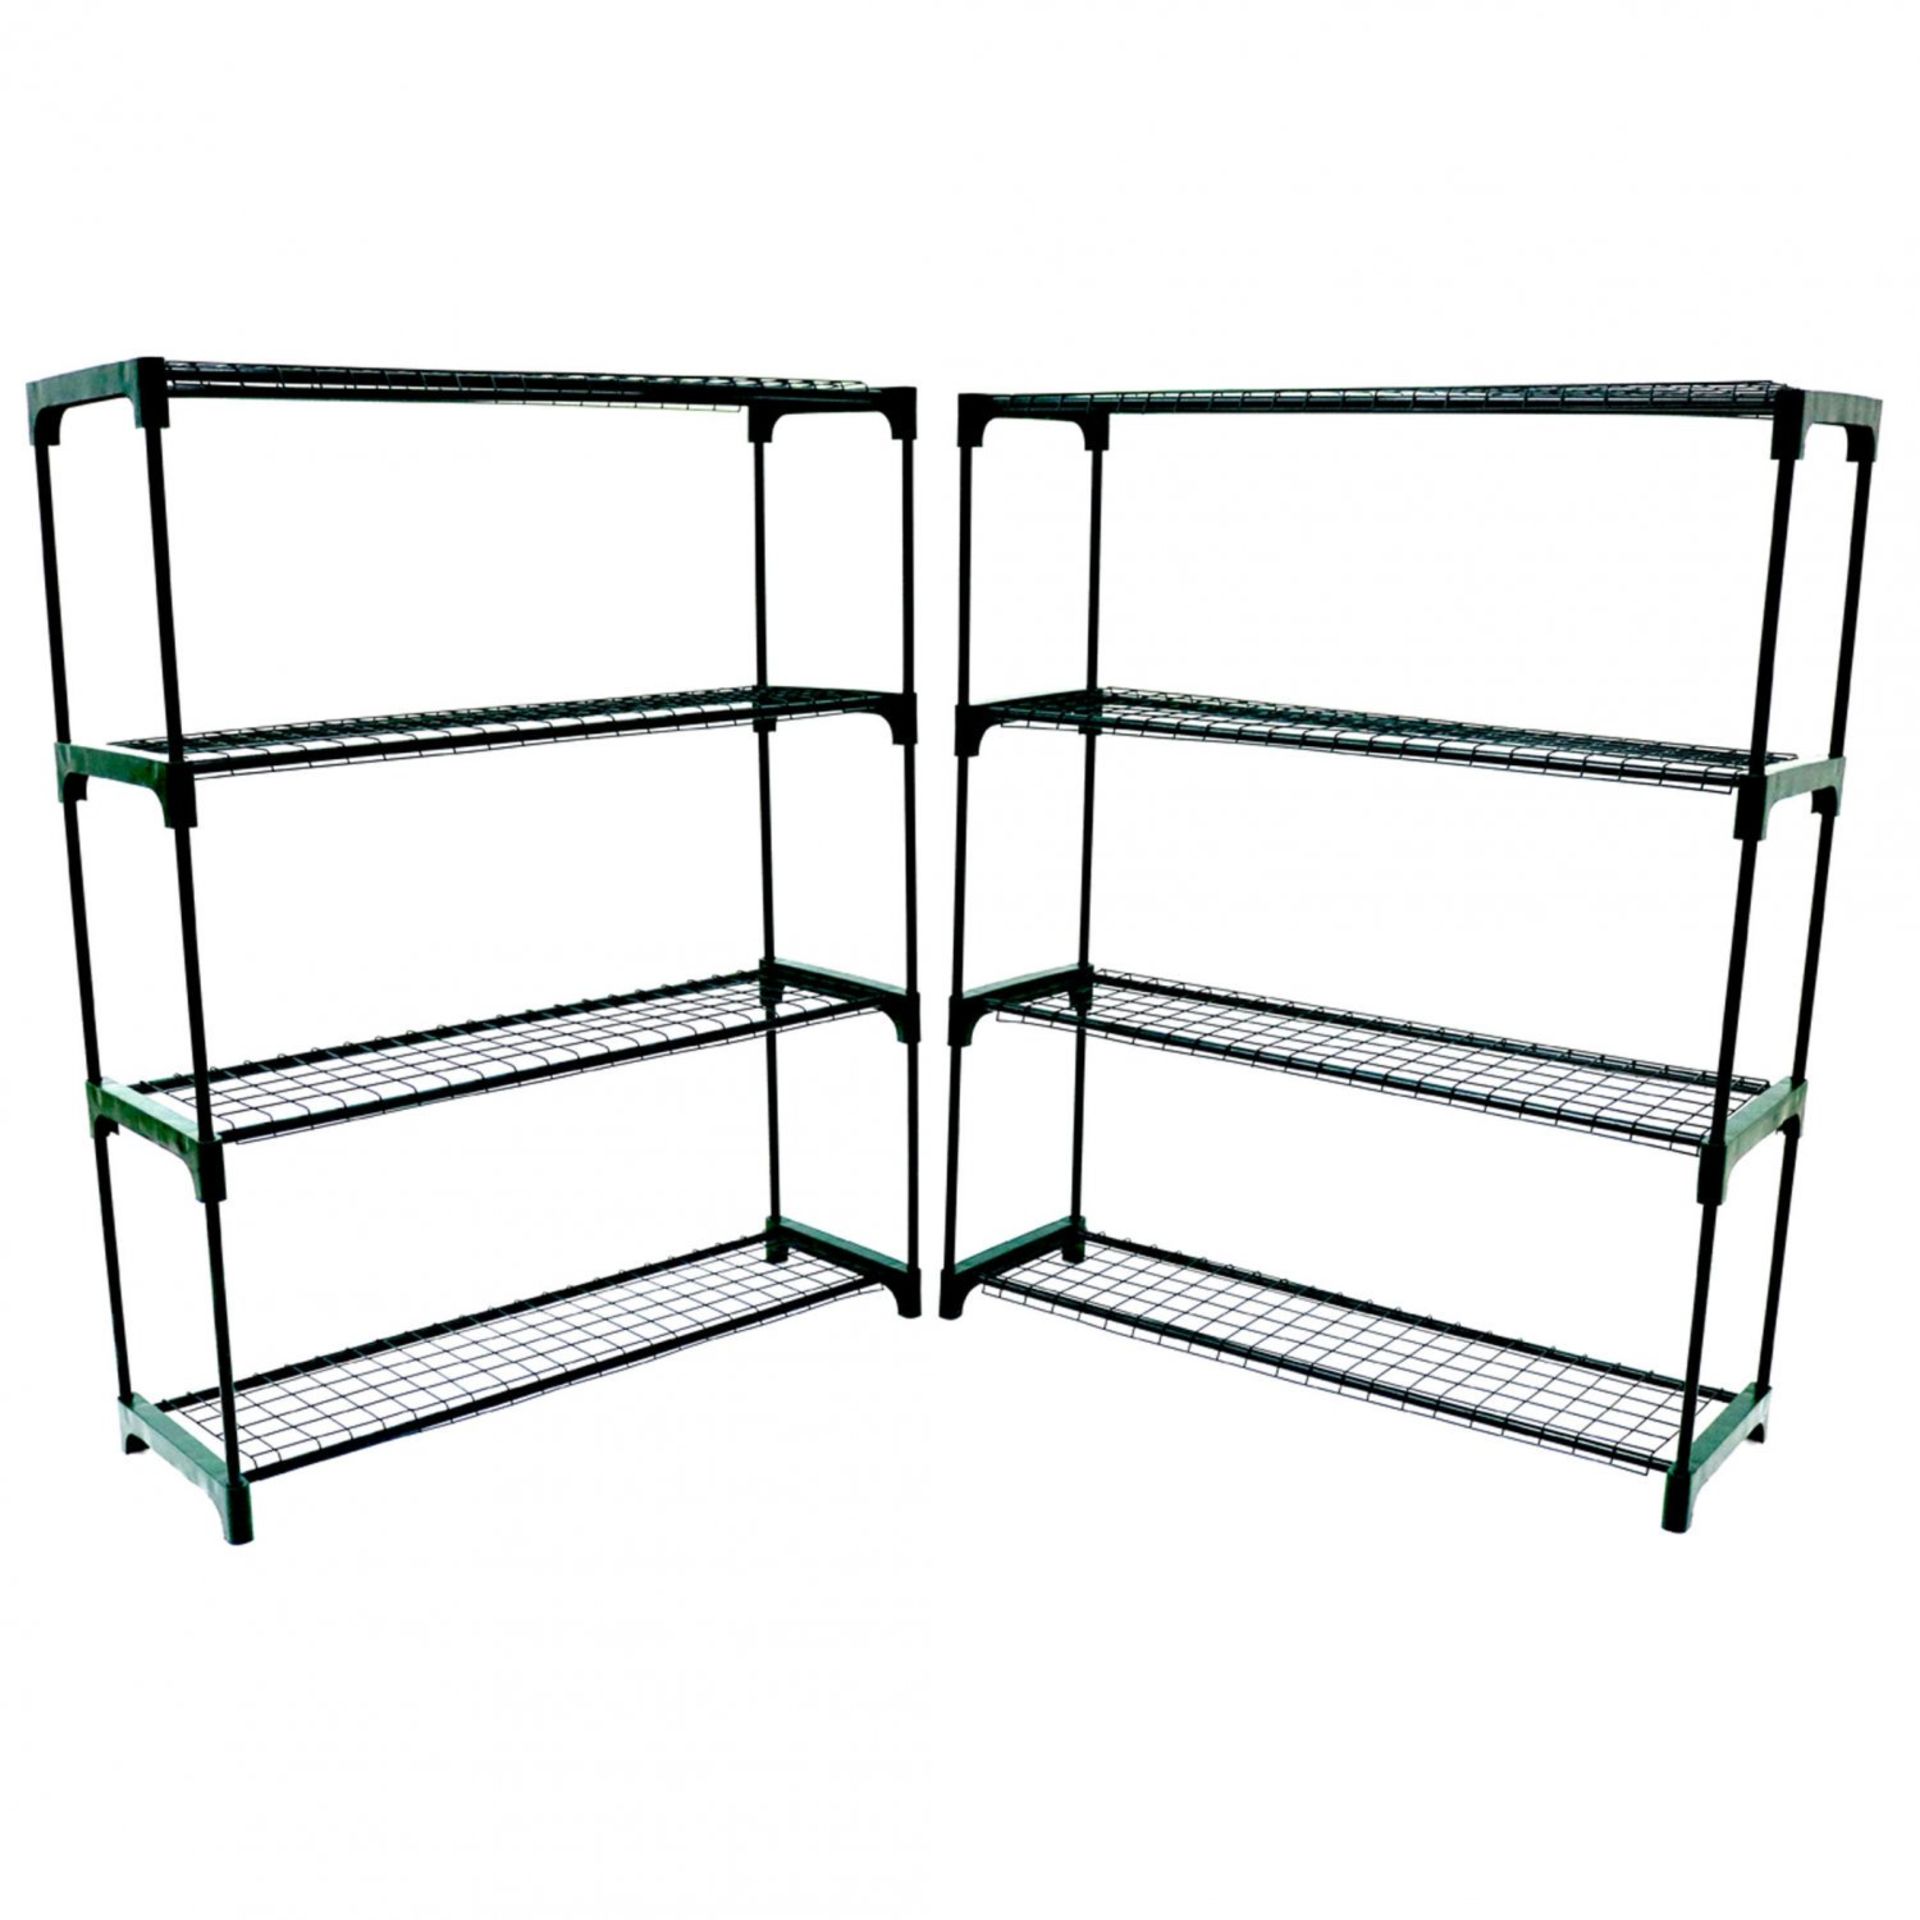 (SK185) Flower Staging (Double Pack) Fantastic value for money, this 4 tier Greenhouse ...